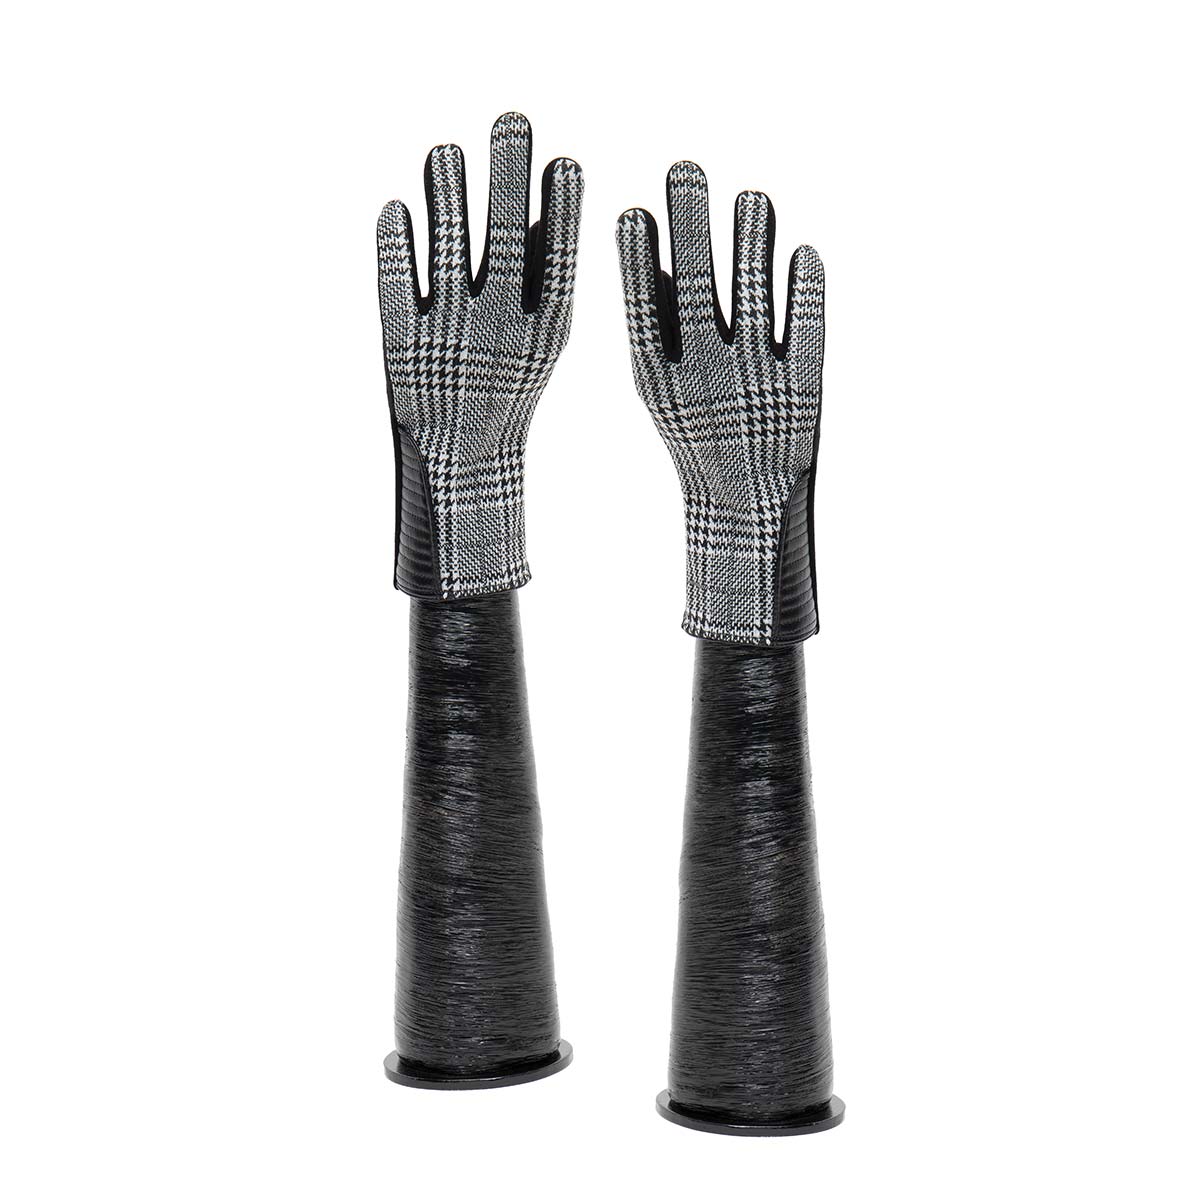 Black and White Plaid Gloves with Black Palm